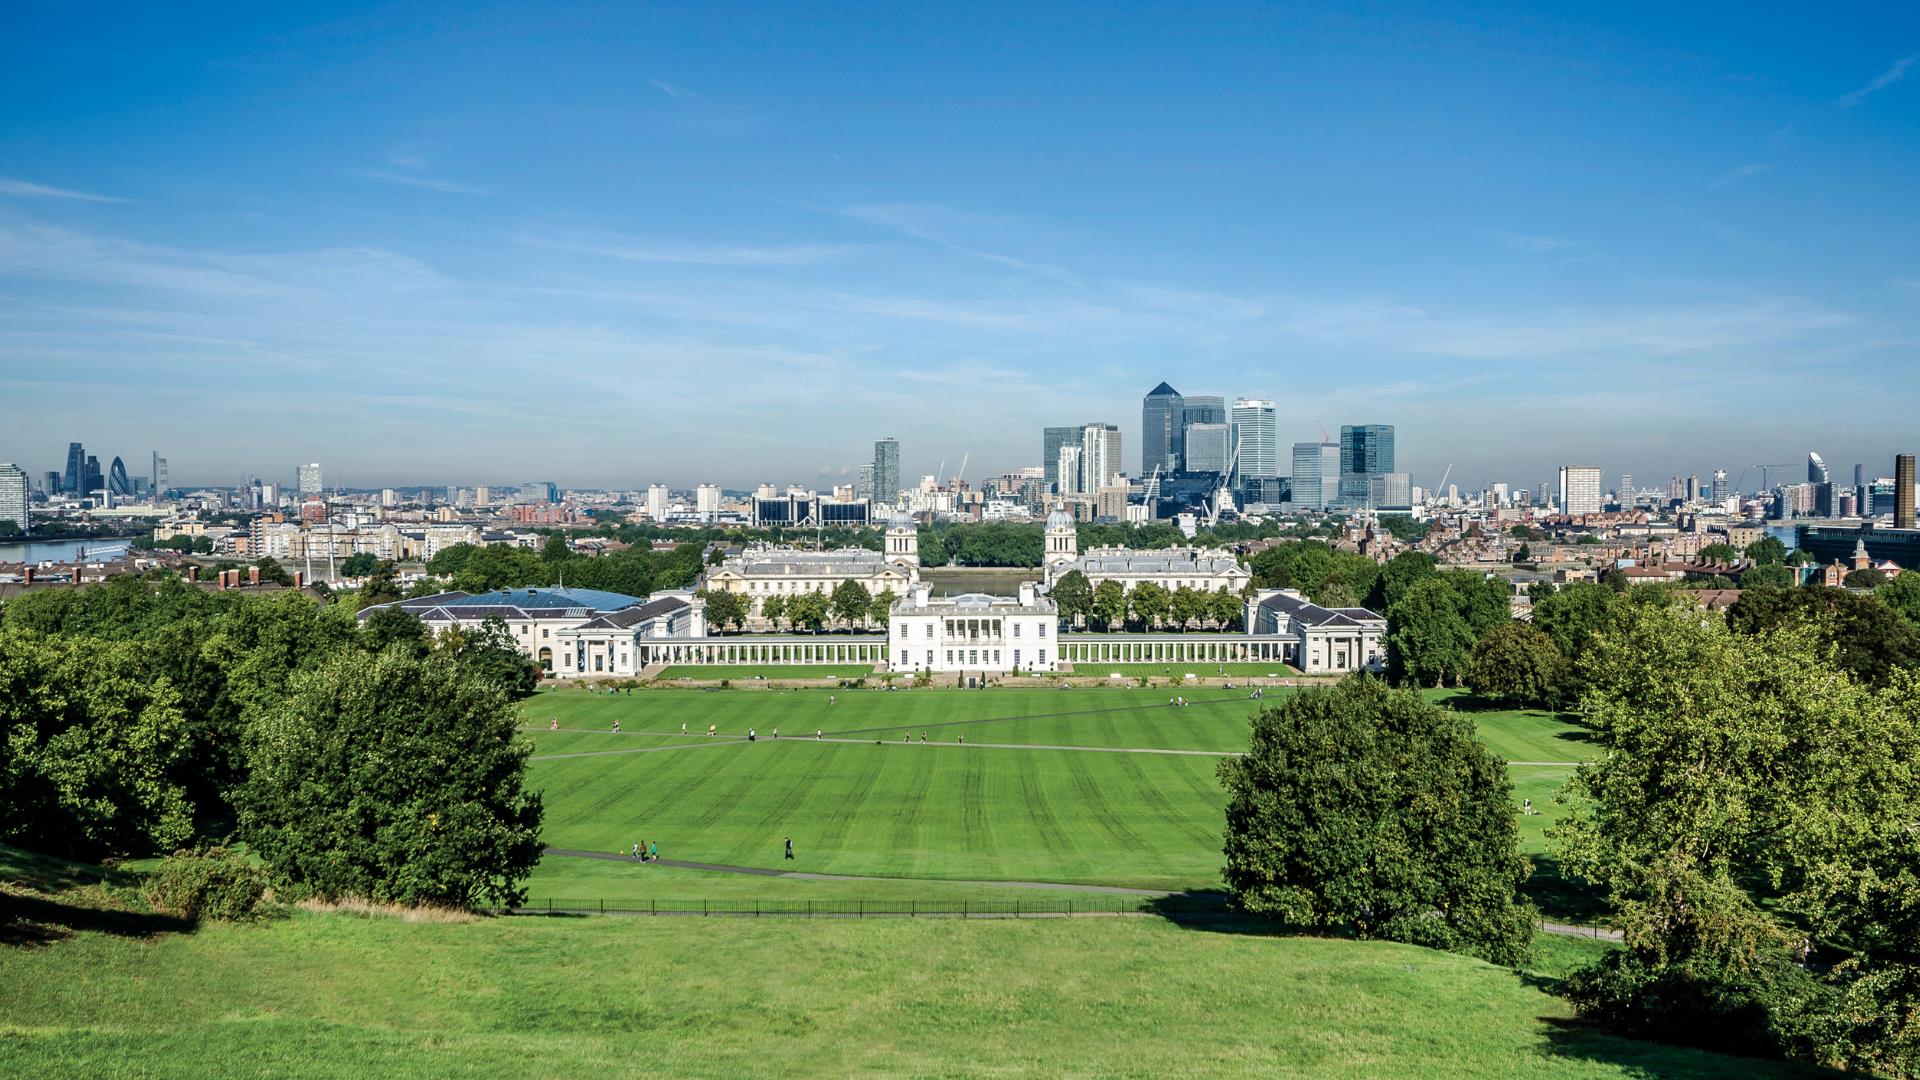 A view of Greenwich from the General Wolfe Statue in Greenwich Park.